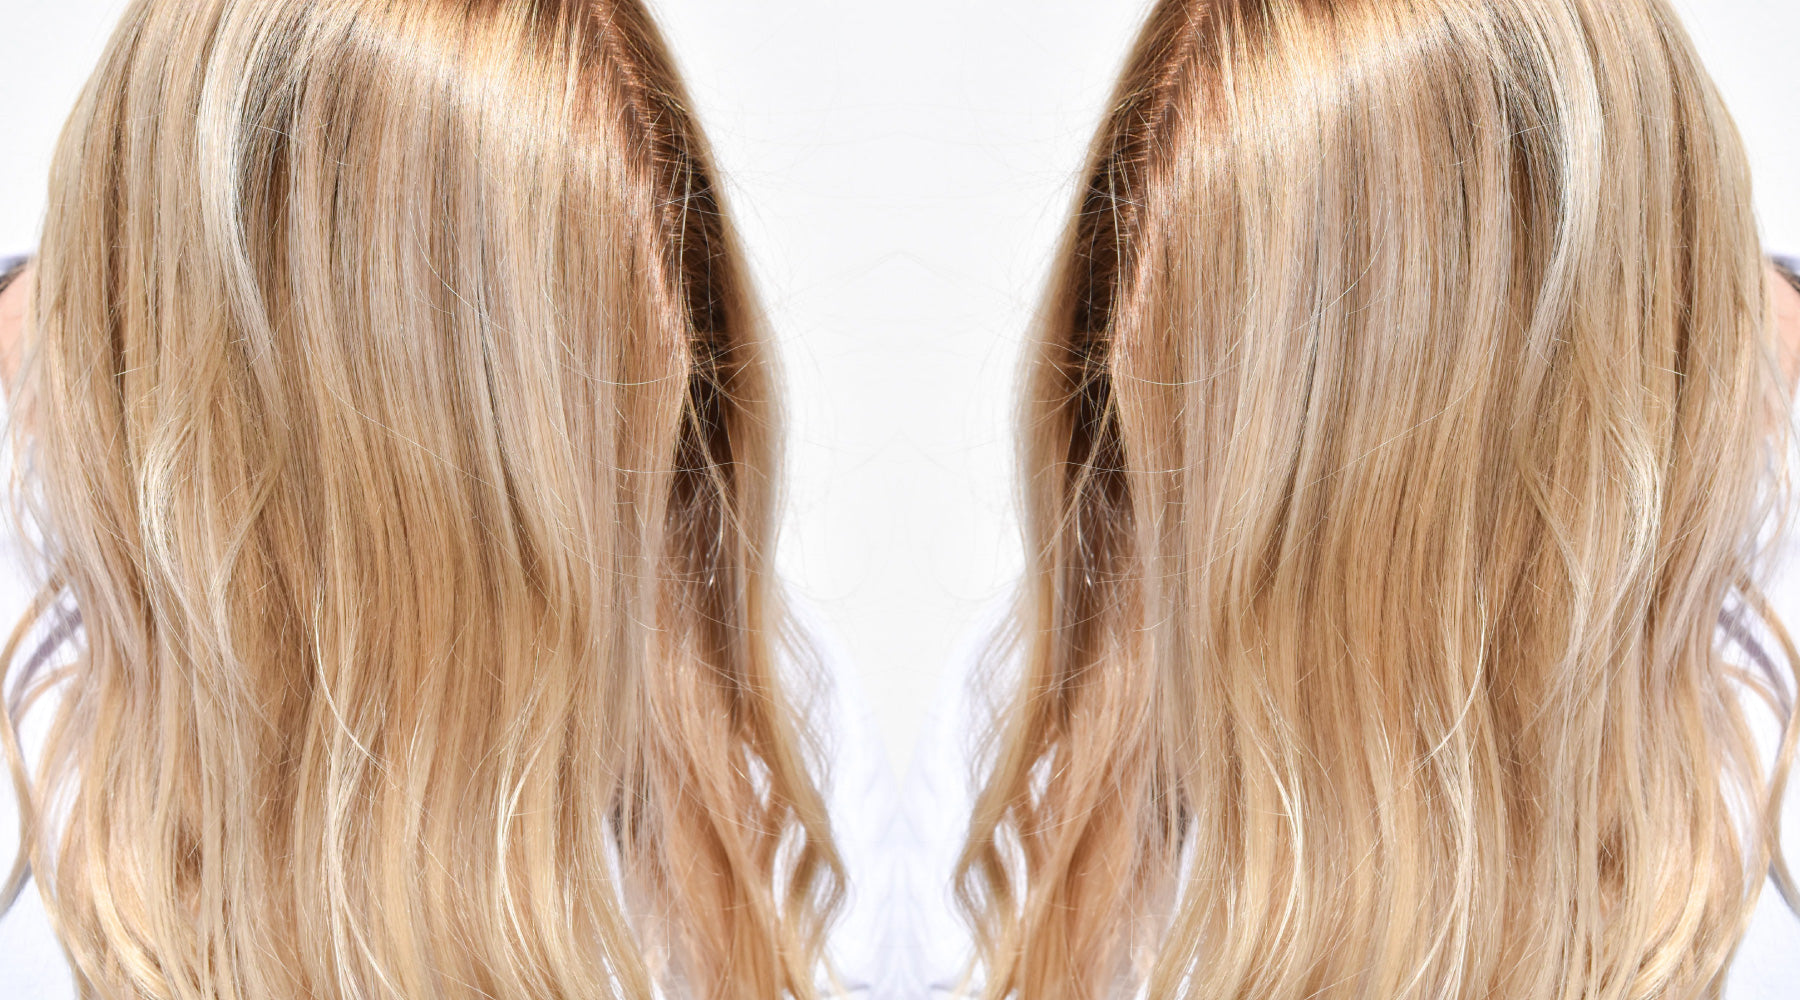 How to Apply Highlight and Lowlight Foils to Hair (with Pictures)